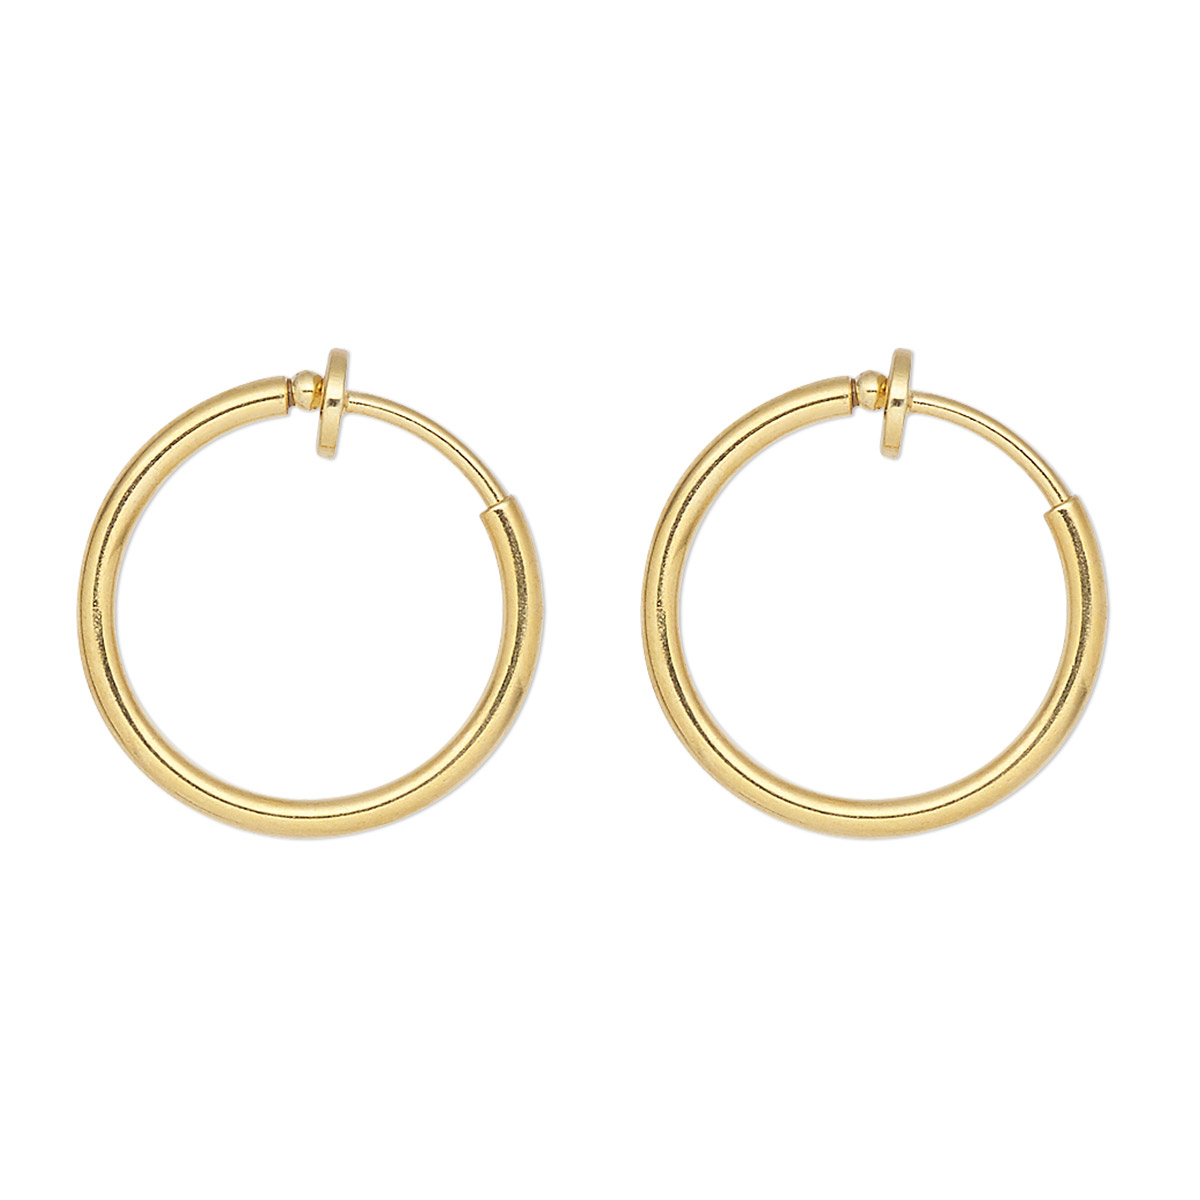 Earring, gold-plated brass, 17mm round hoop with pierced-look spring ...